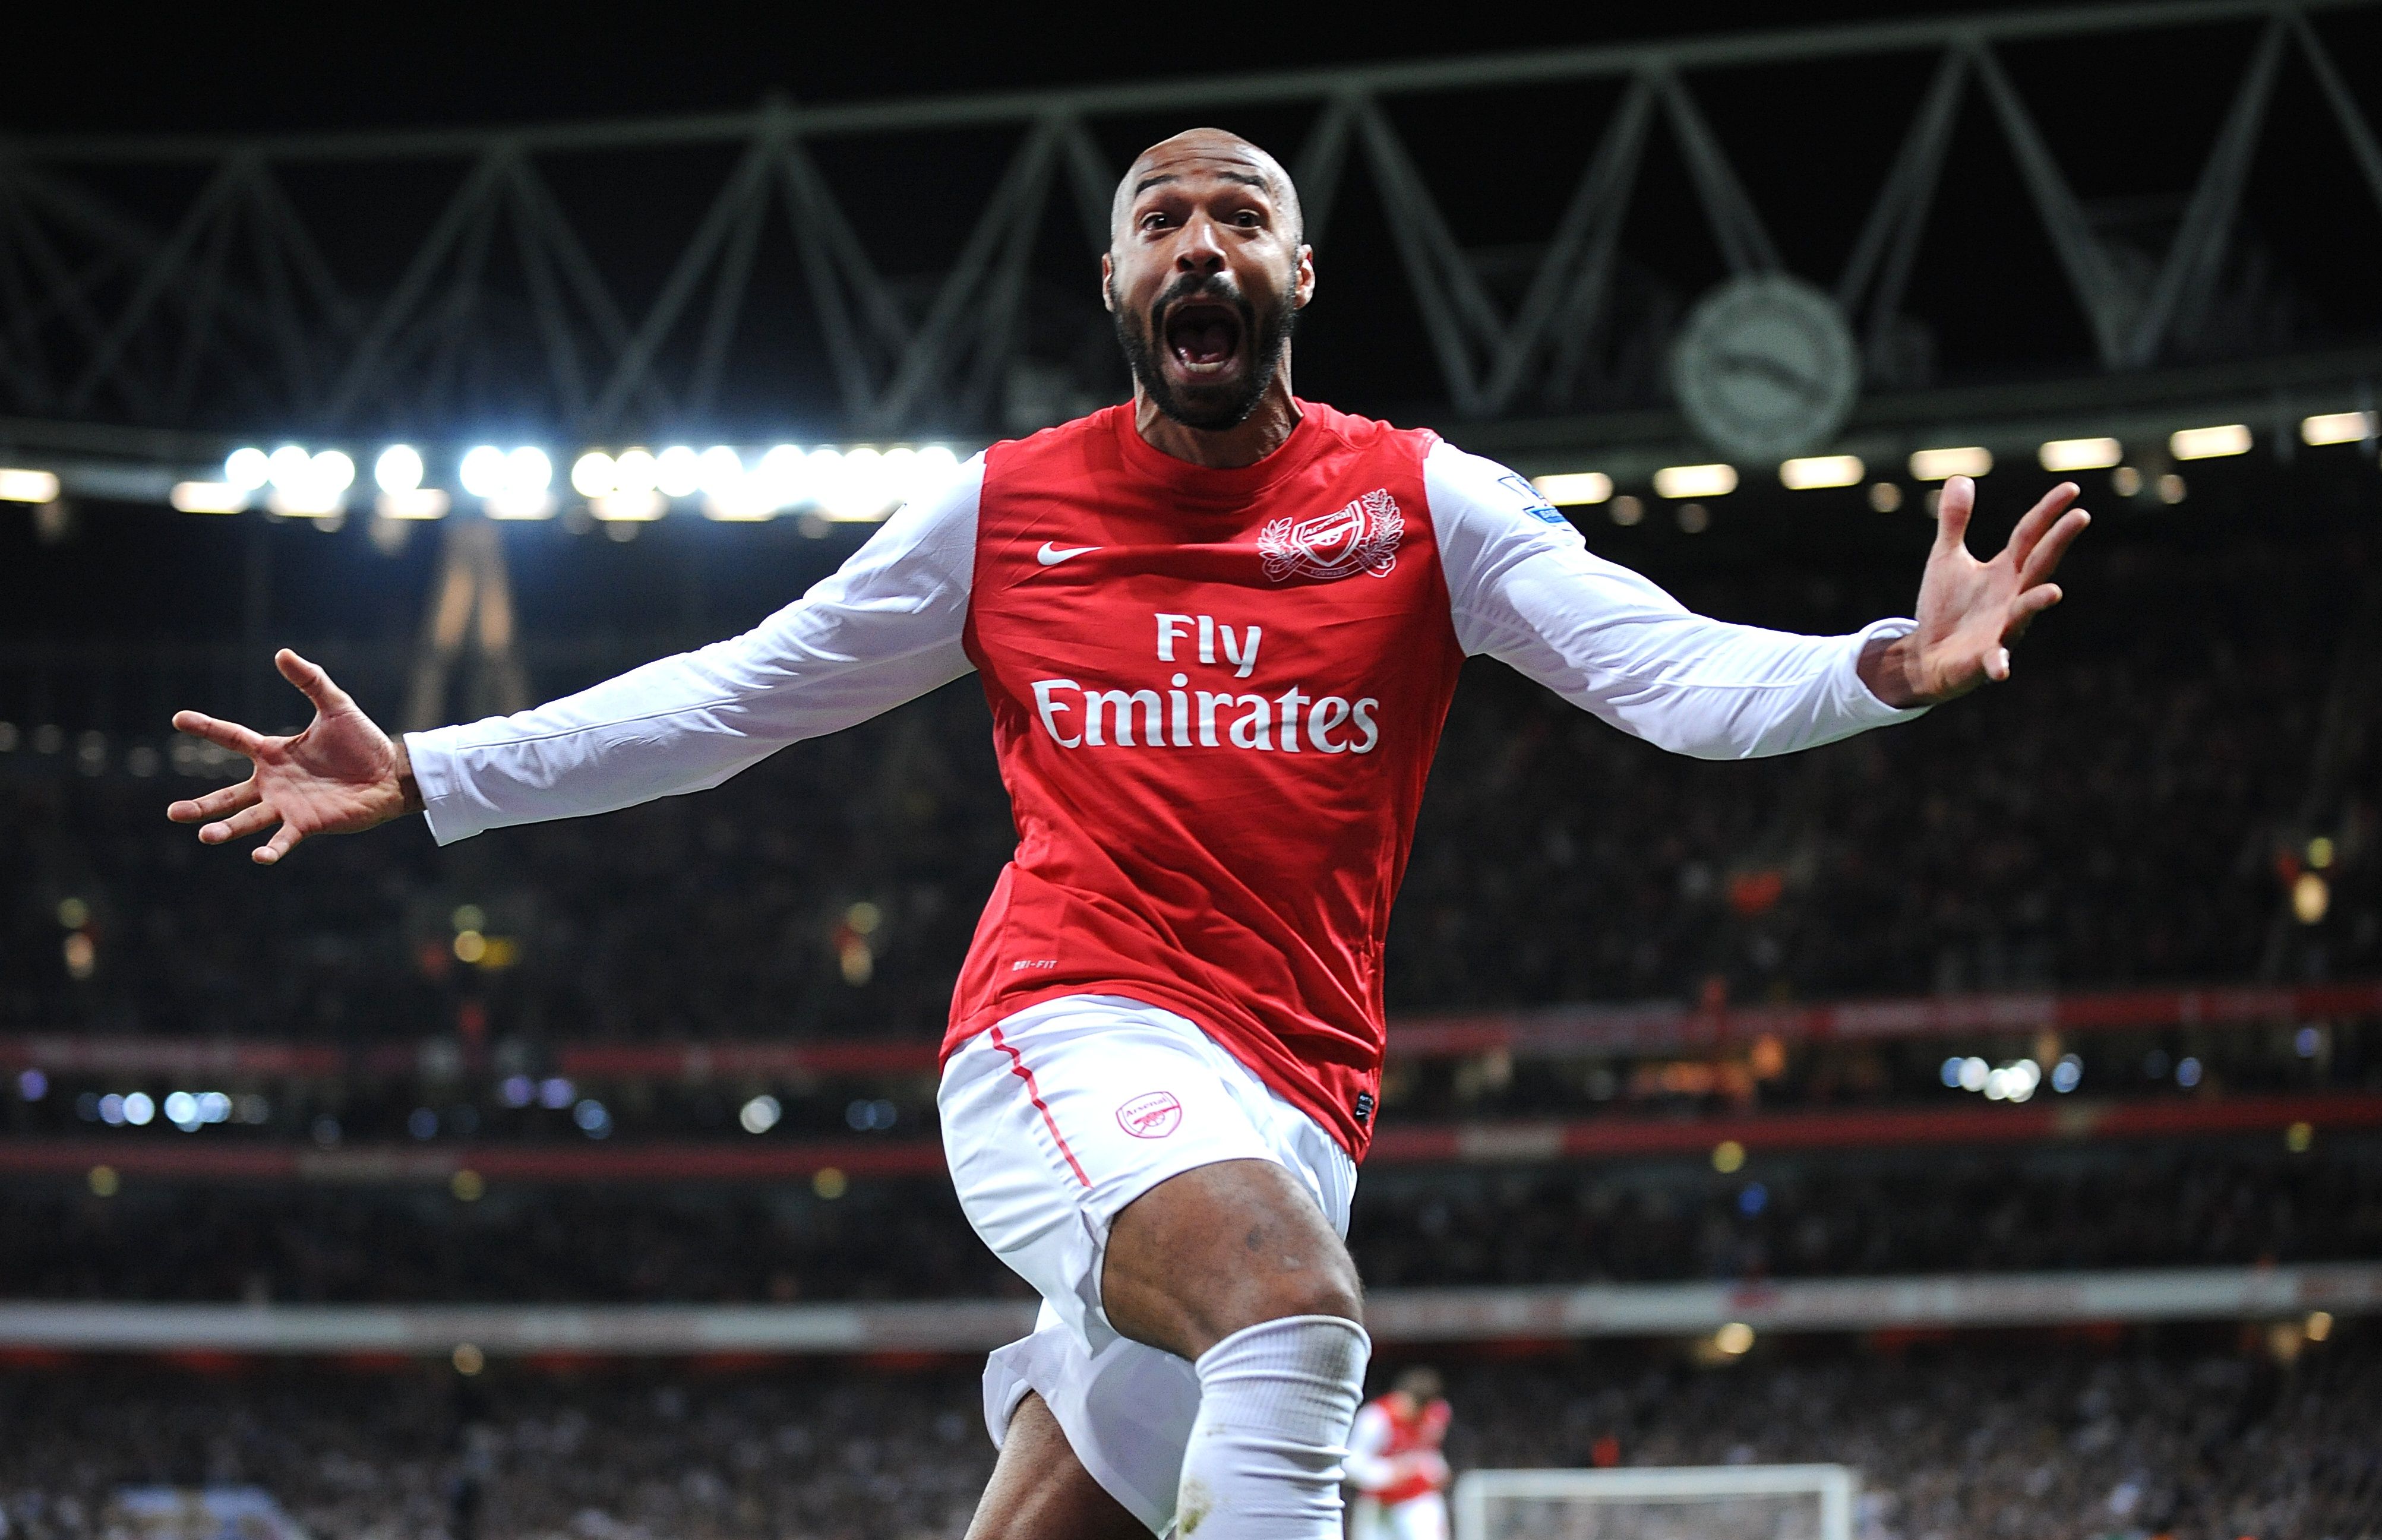 Appreciating Thierry Henry